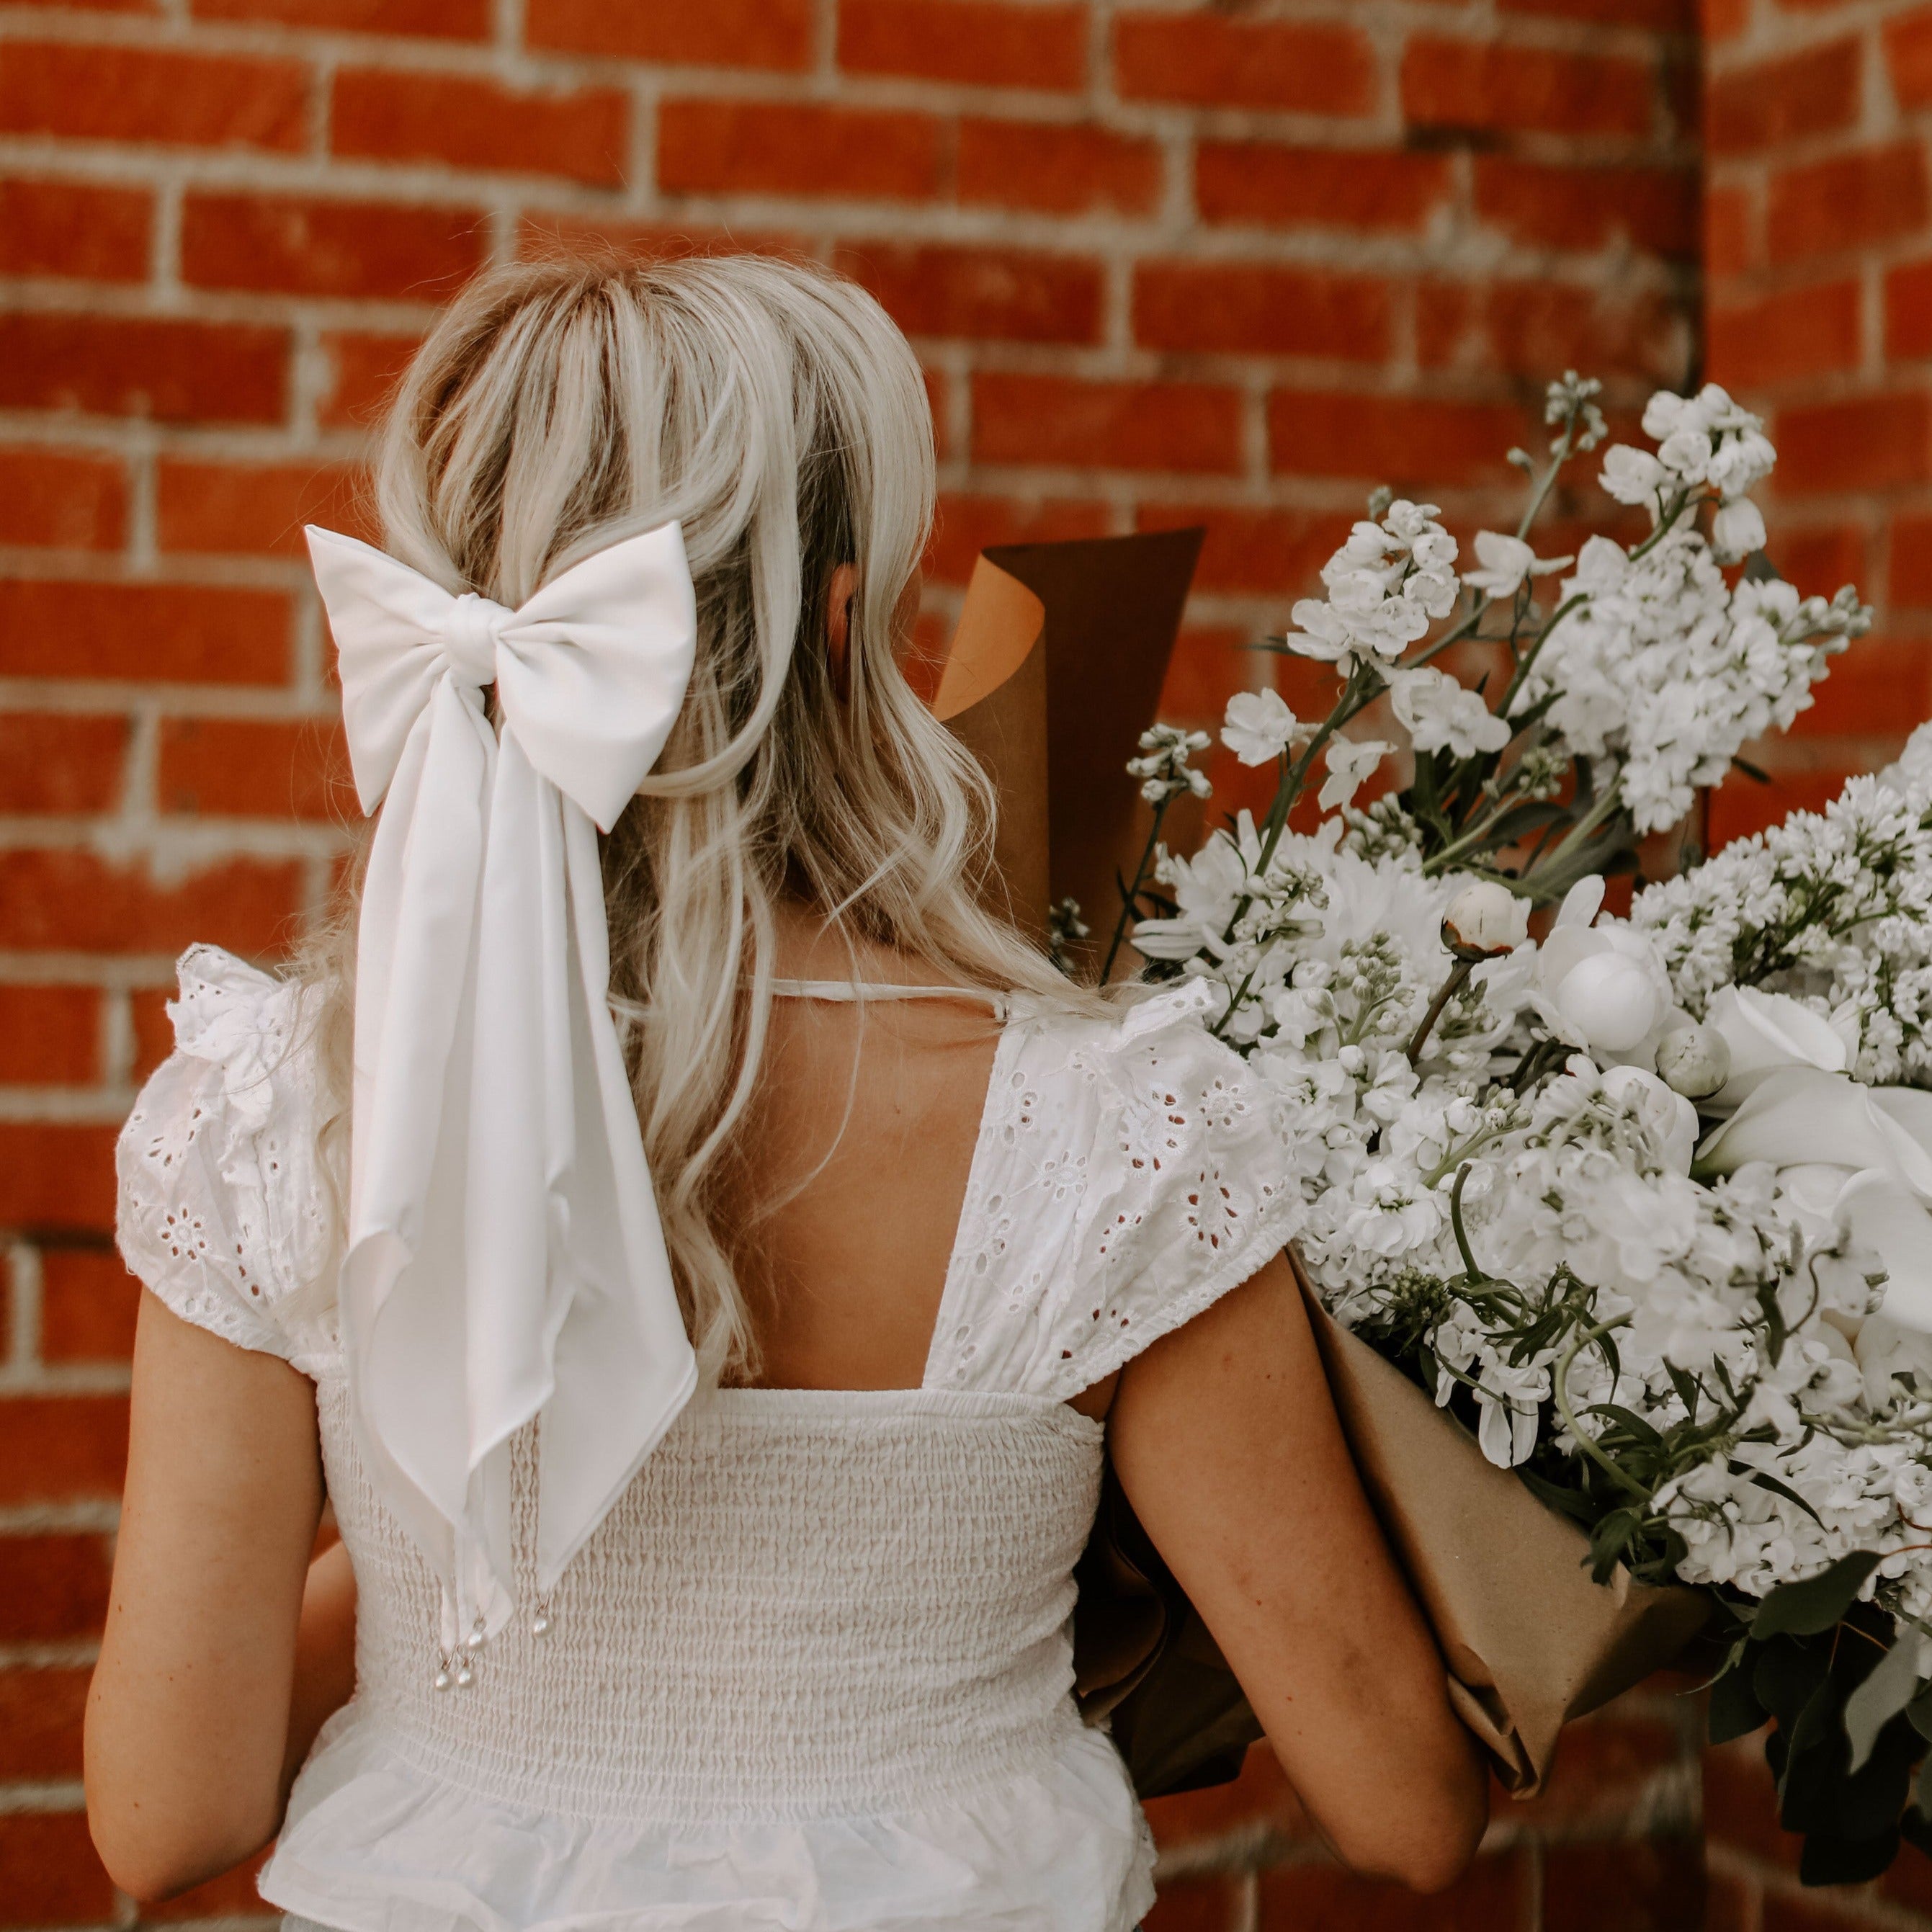 Blonde female facing brick wall with long bridal bow tying hair back half up , half down wearing white shirt and holding bundle of white flowers.